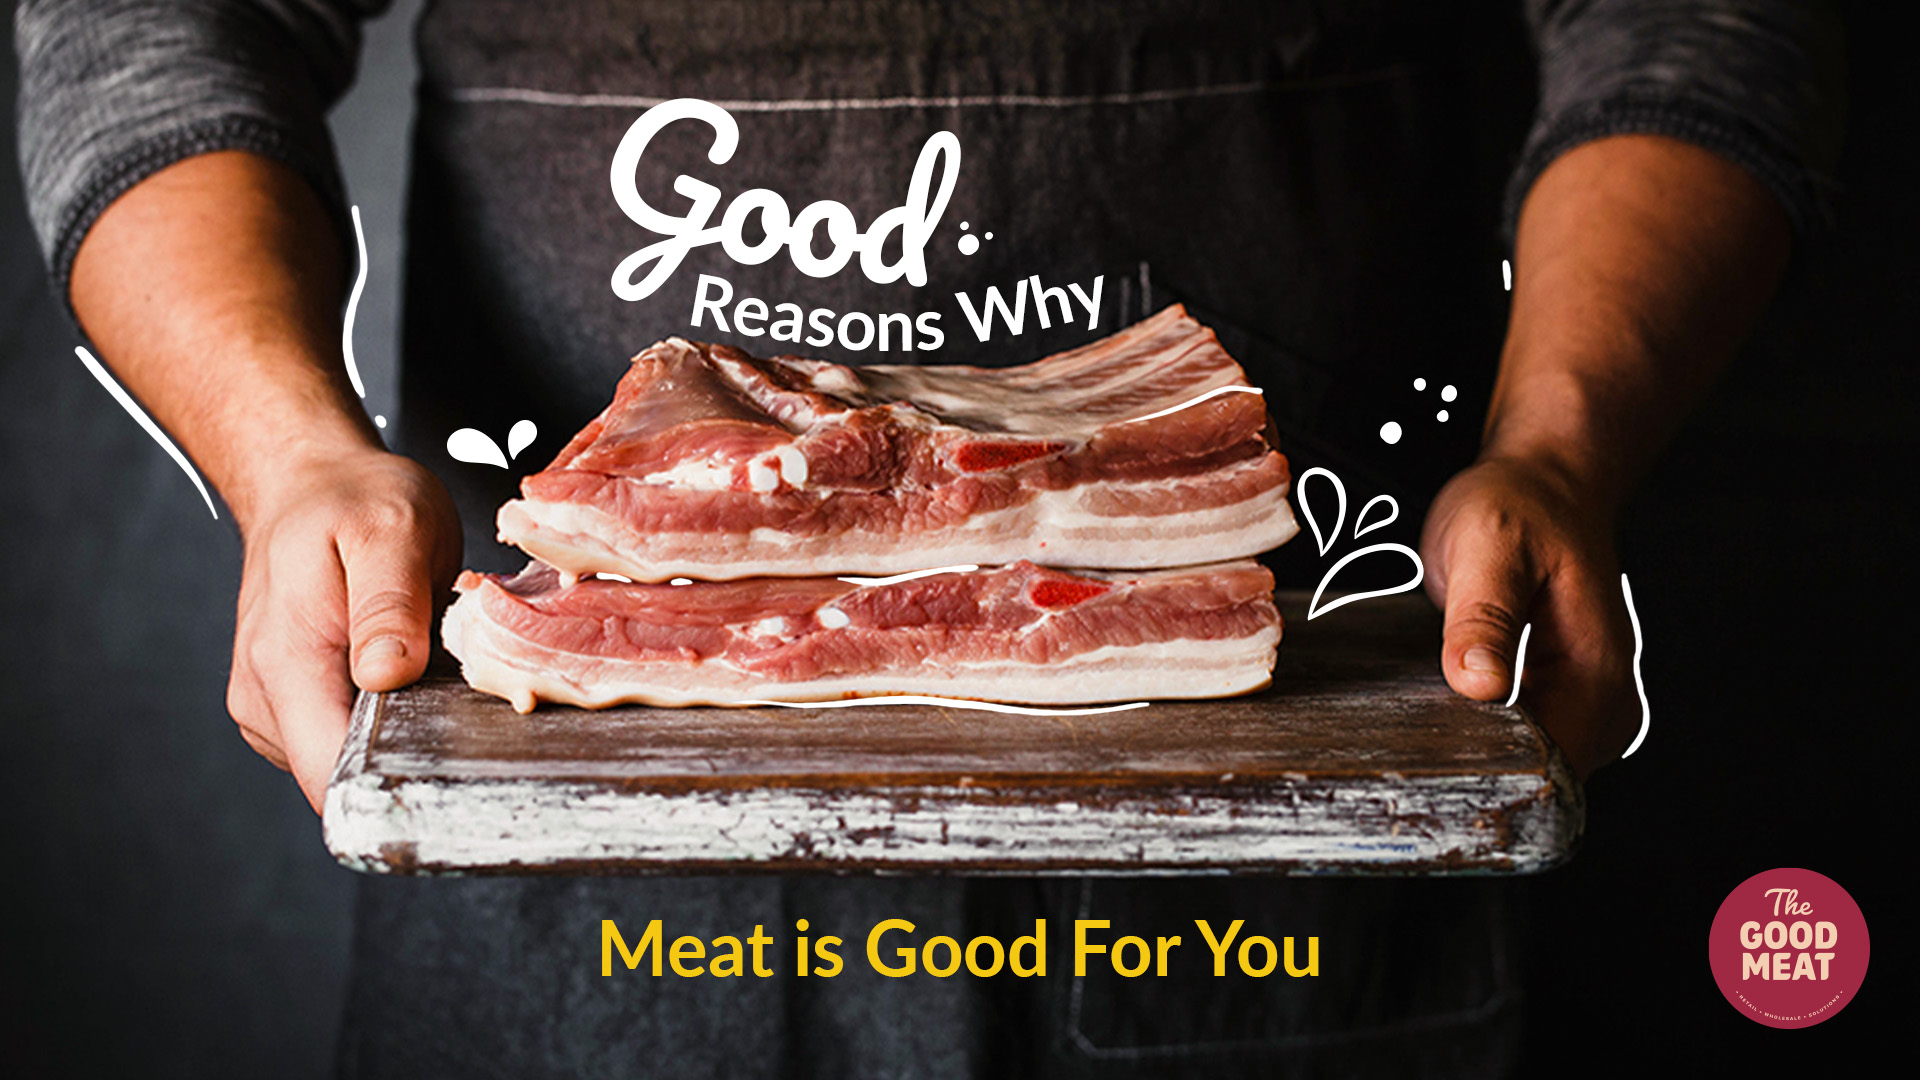 Good Reasons Why Meat is Good For You